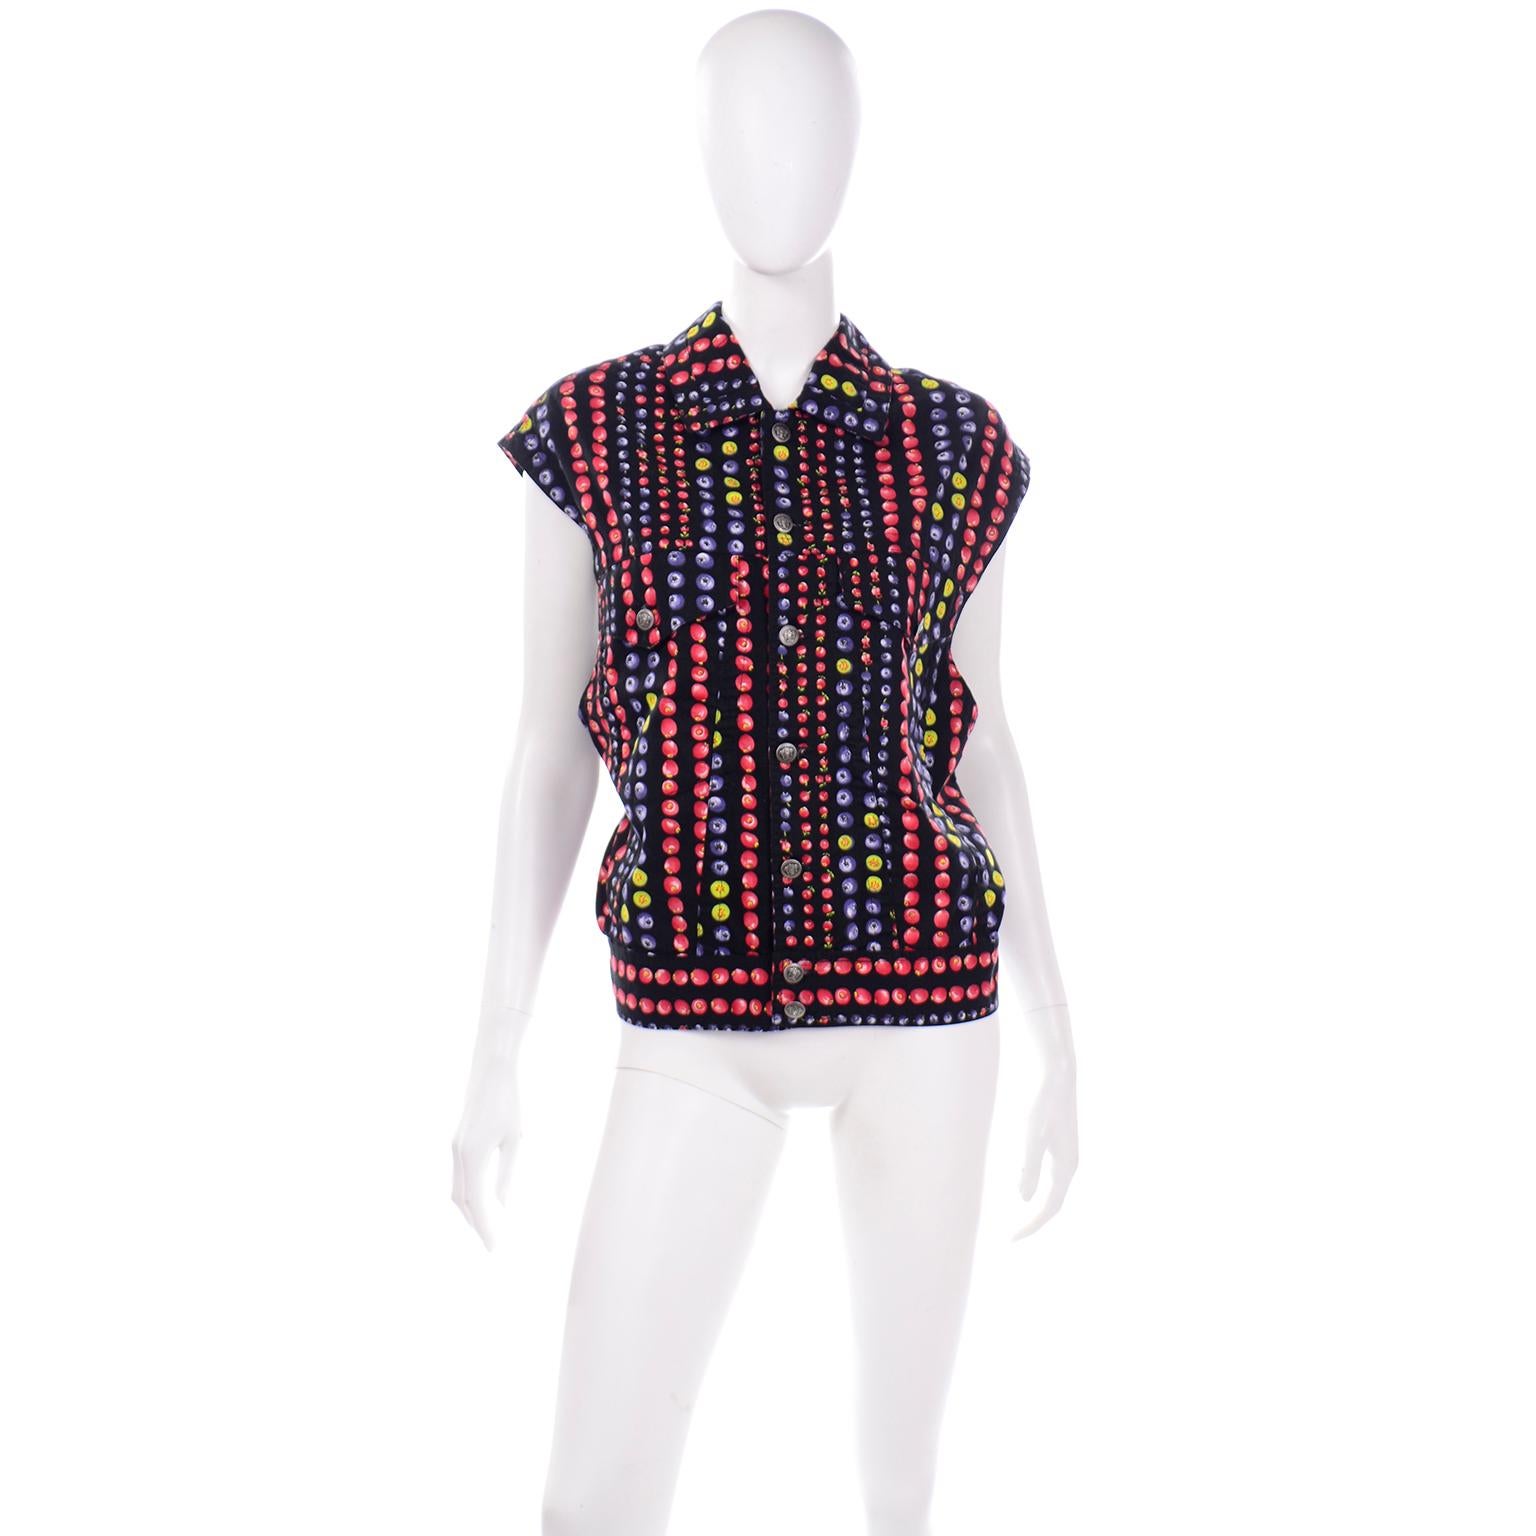 This is a unique cotton fruit printed denim vest with the Versace Jeans Couture label from 1995. The base color of this vest is black and has vertical stripes that feature multi colored fruits in shades of blue, red, yellow, and green. The vest has